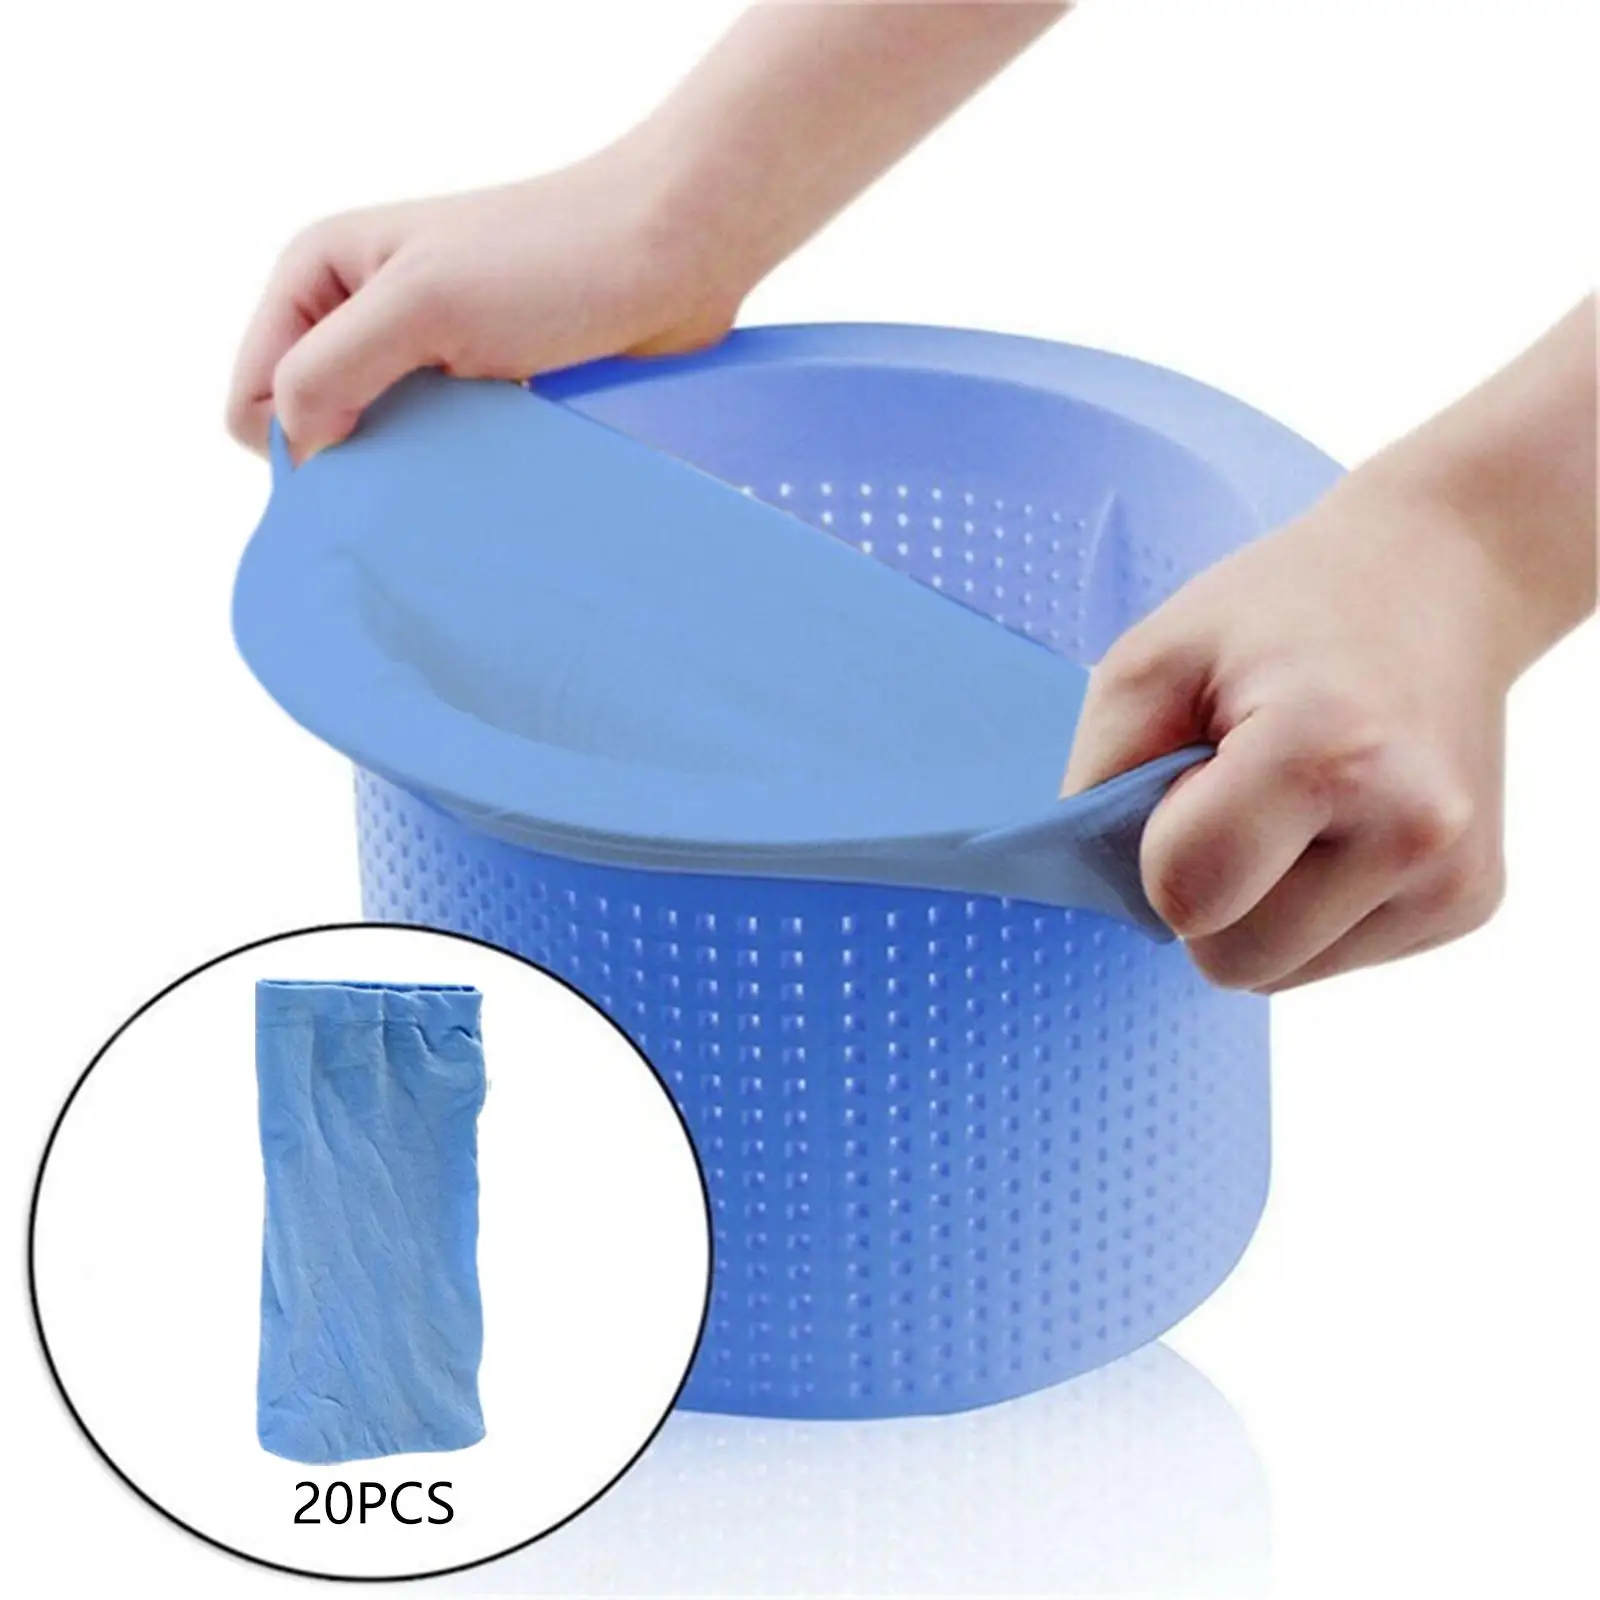 20 Pieces Pool Skimmer Socks Blue Lightweight Swimming Pool Maintenance Replace